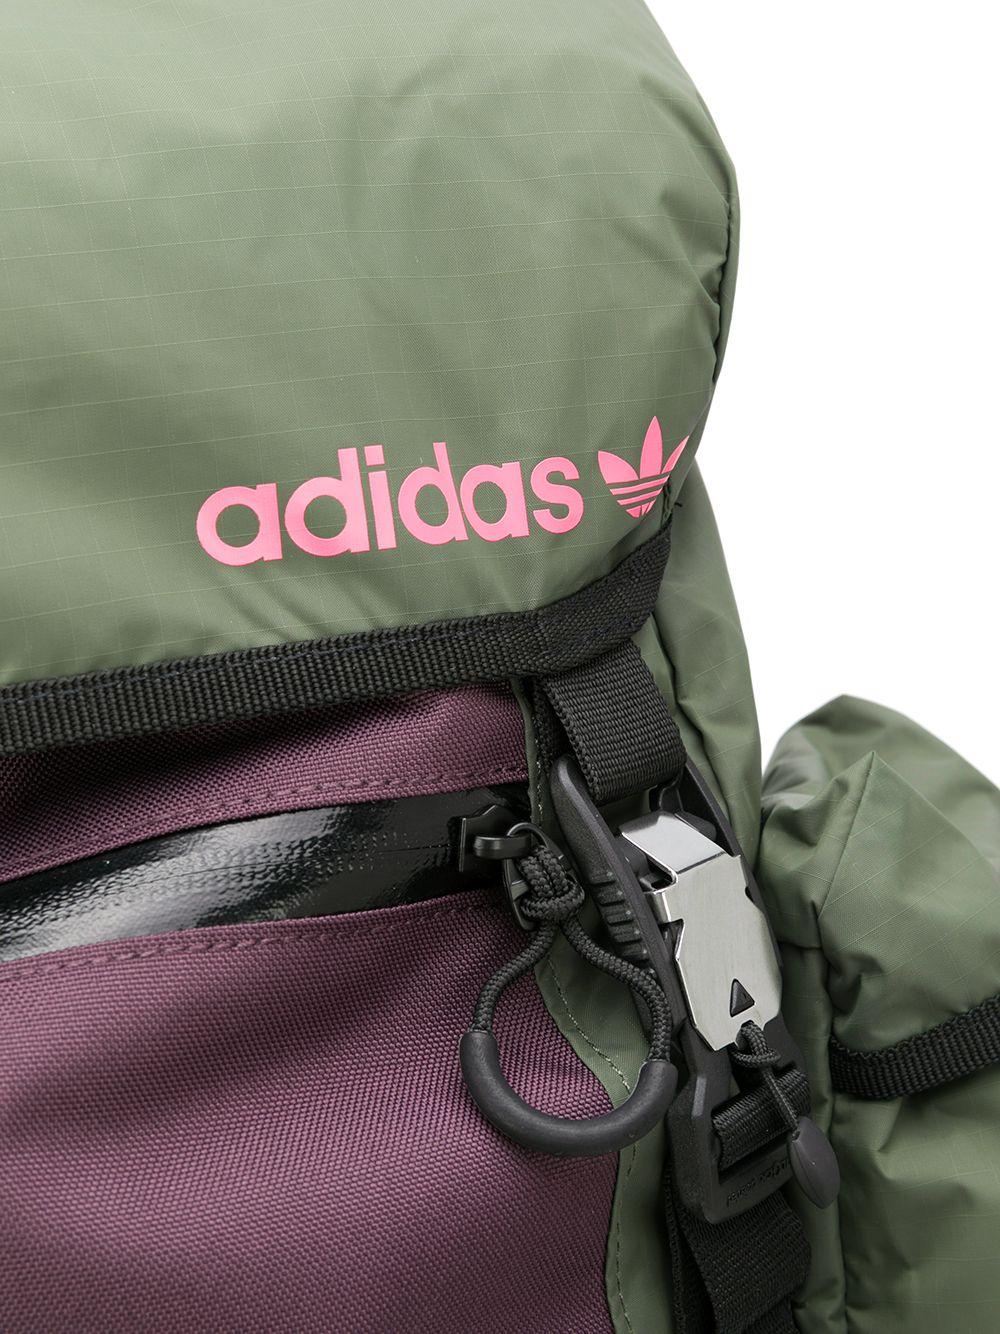 adidas Adventure Toploader Backpack in Green for Men | Lyst